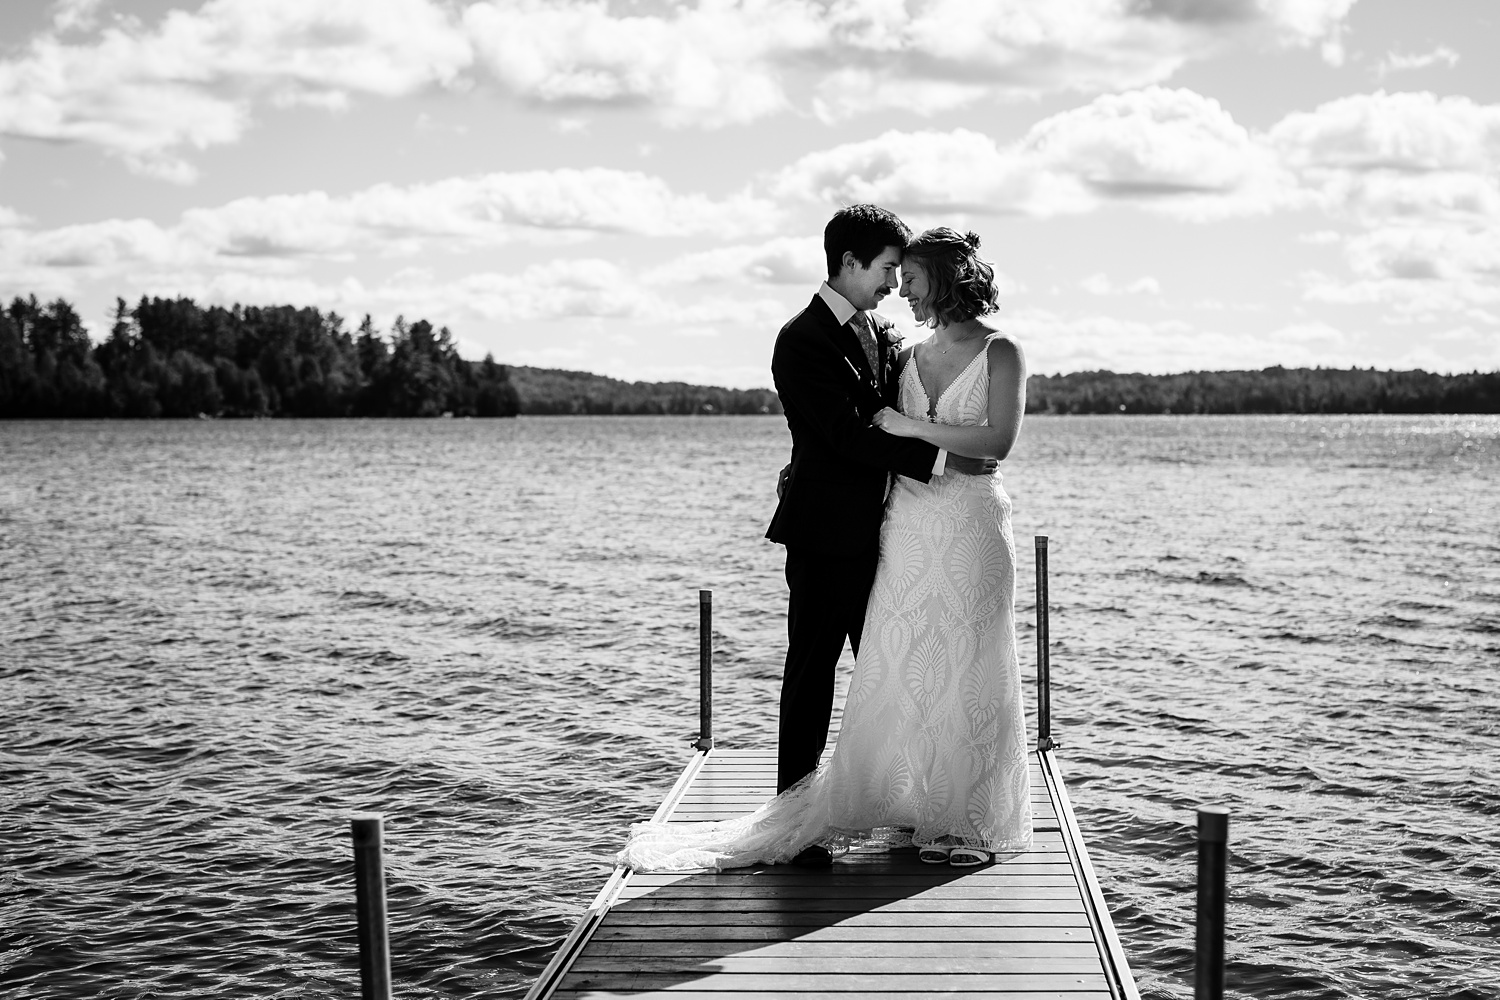 The bride and groom out on the lake for their fall wedding day 